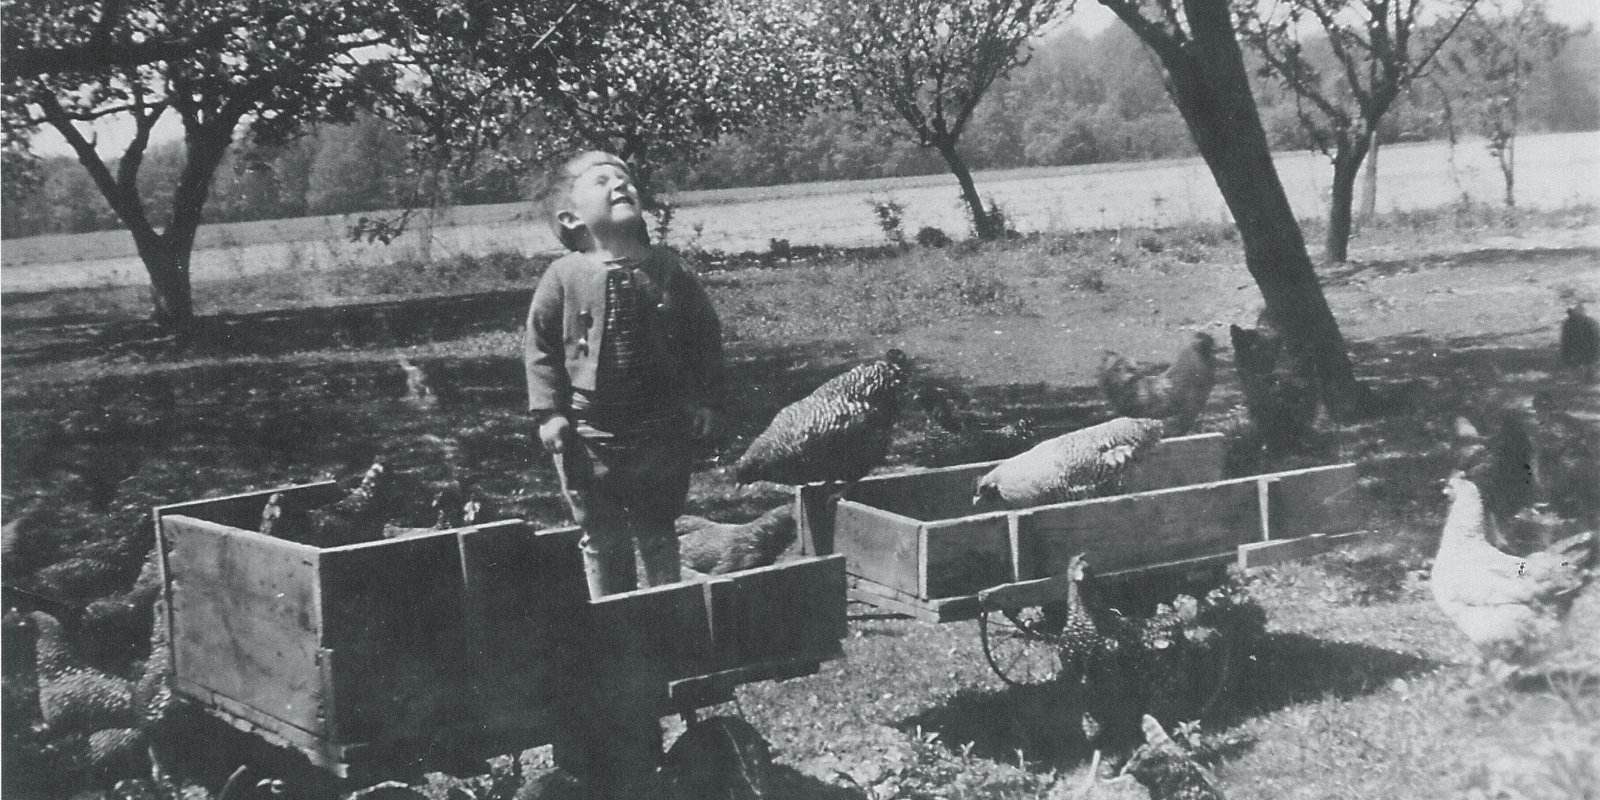 Young Peter Williams standing in his wagon, smiling at the sky, surrounded by chickens on the ground